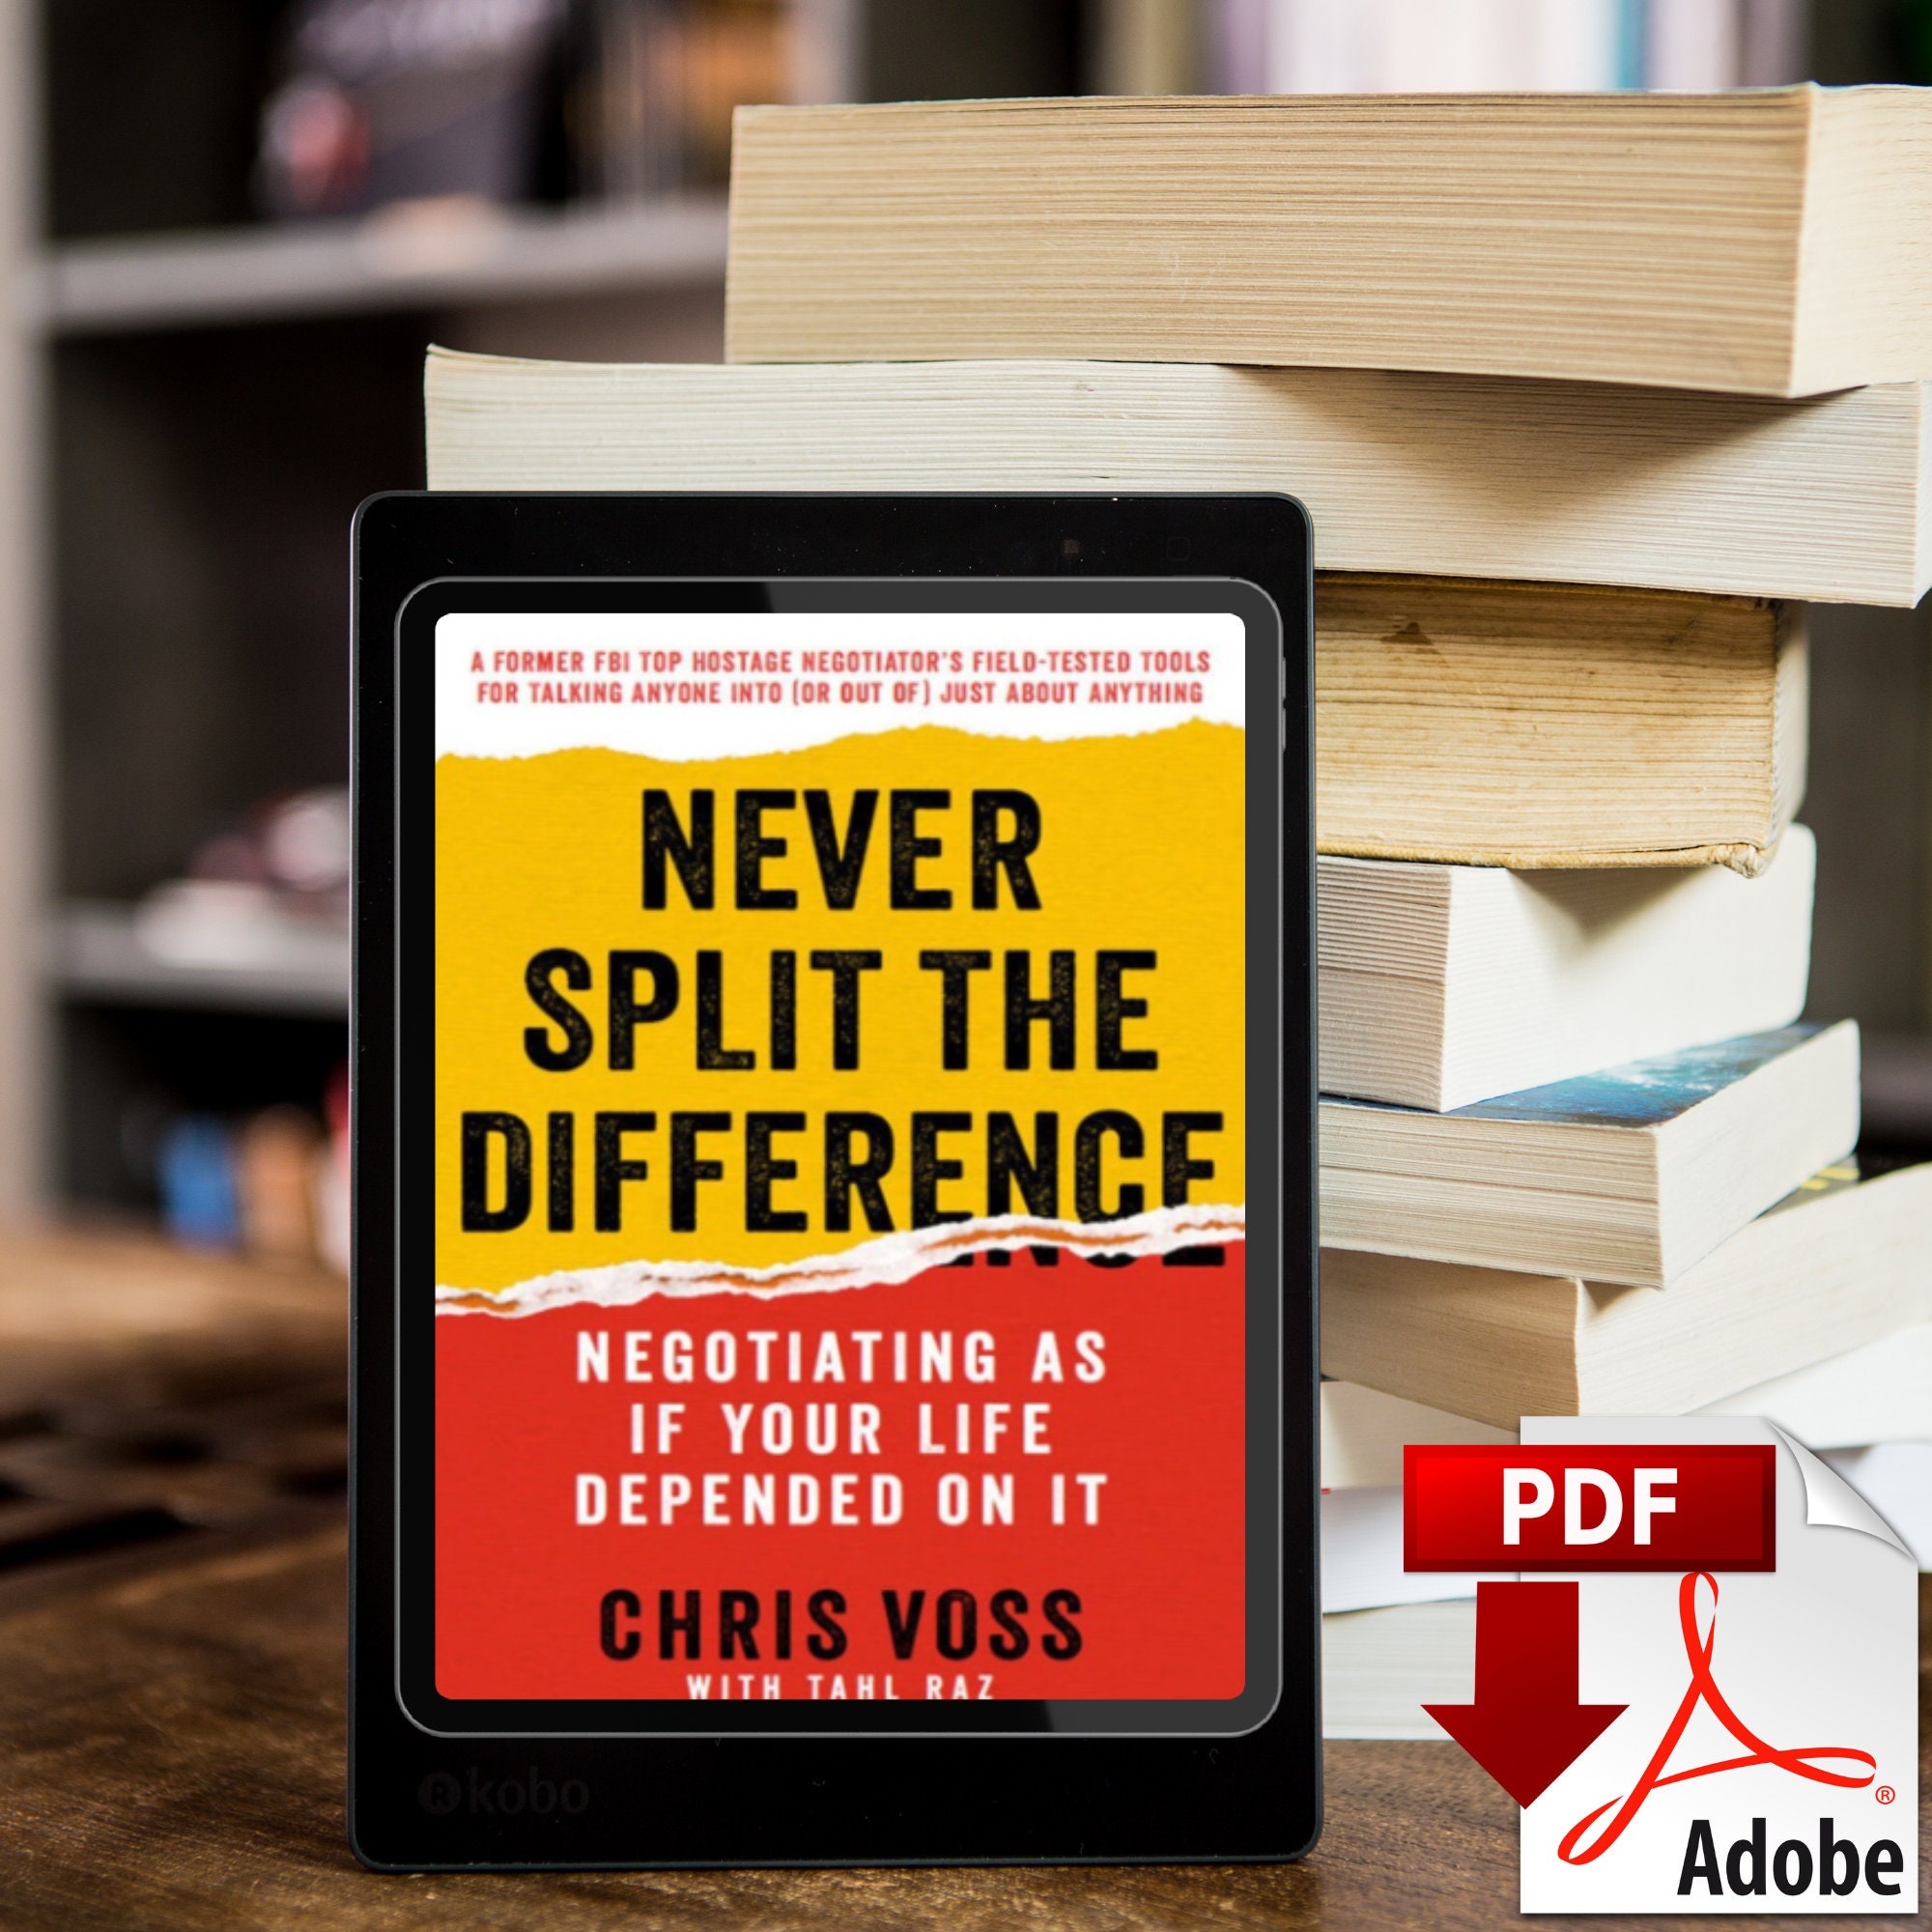 Never Split the Difference by Chris Voss and Tahl Raz